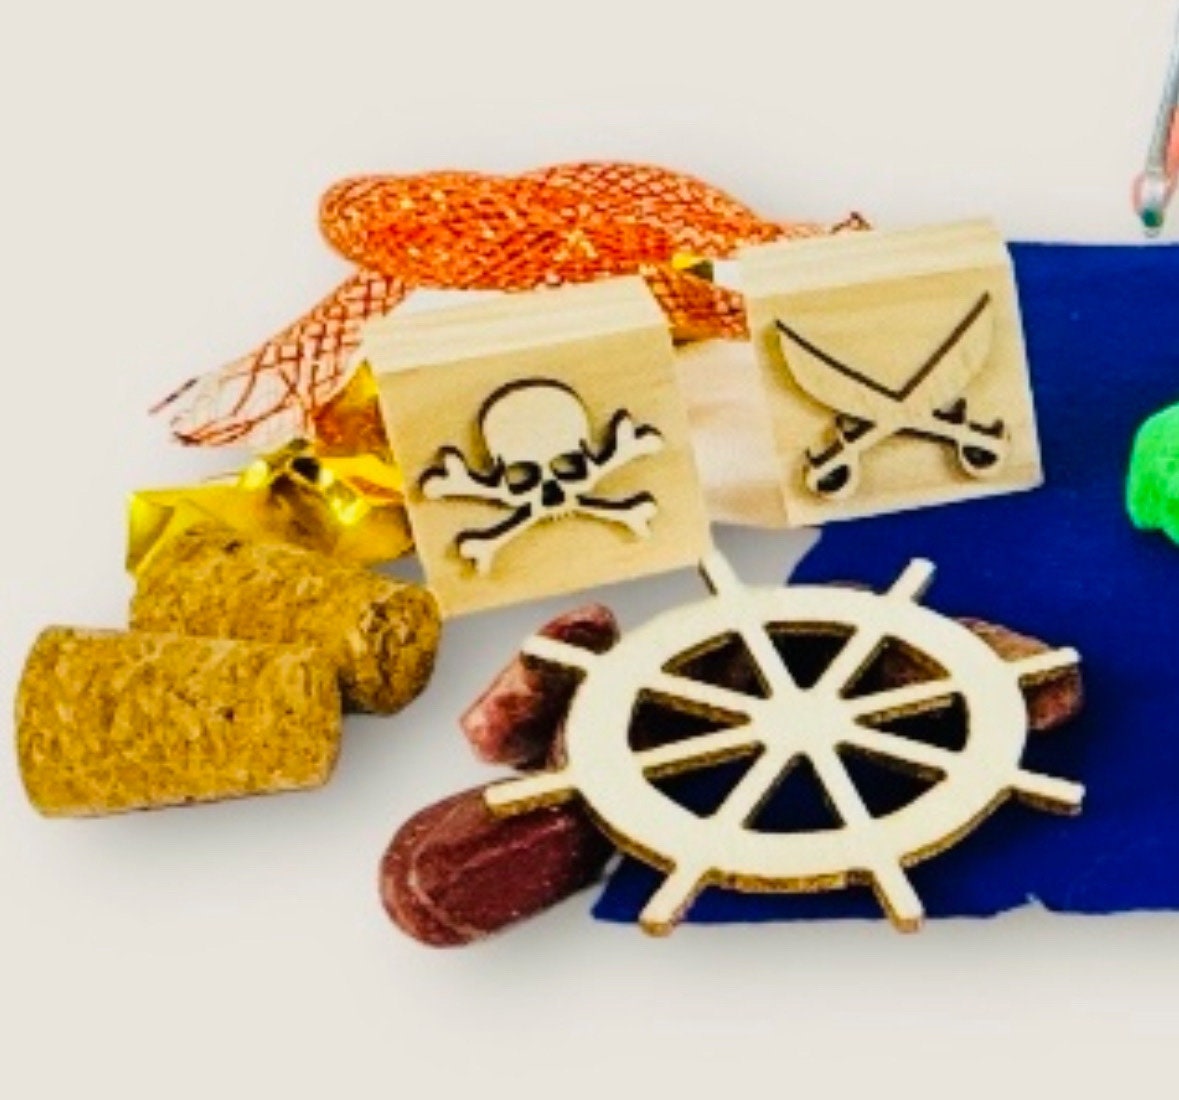 Pirate Play Dough Sensory Kit, Pirate Busy Box, Pirate Activity Bin for Children, Birthday Gifts For Boys, Kinetic Sand Kits, Play Dough Kit